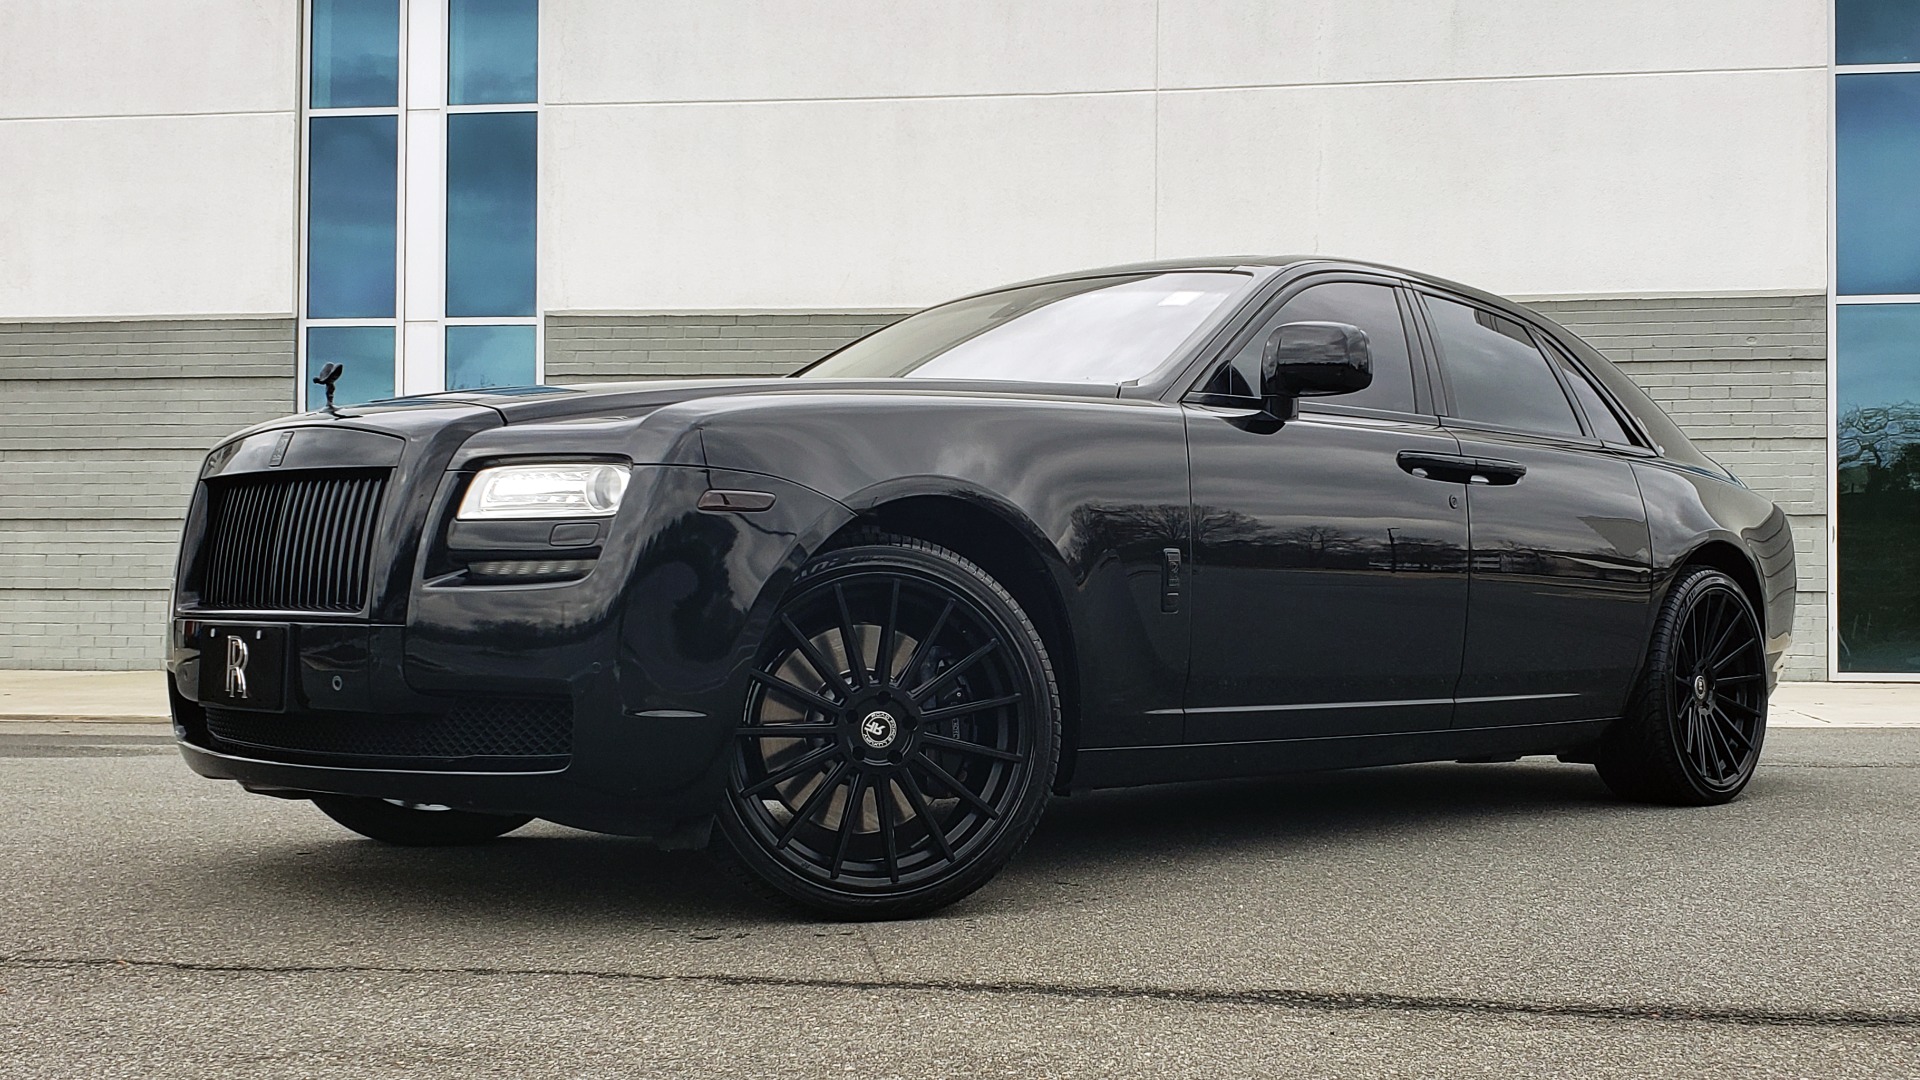 Used 2010 Rolls-Royce GHOST 6.6L TURBO V12 (563HP) / NAV / SUNROOF / SUICIDE DOORS for sale Sold at Formula Imports in Charlotte NC 28227 2